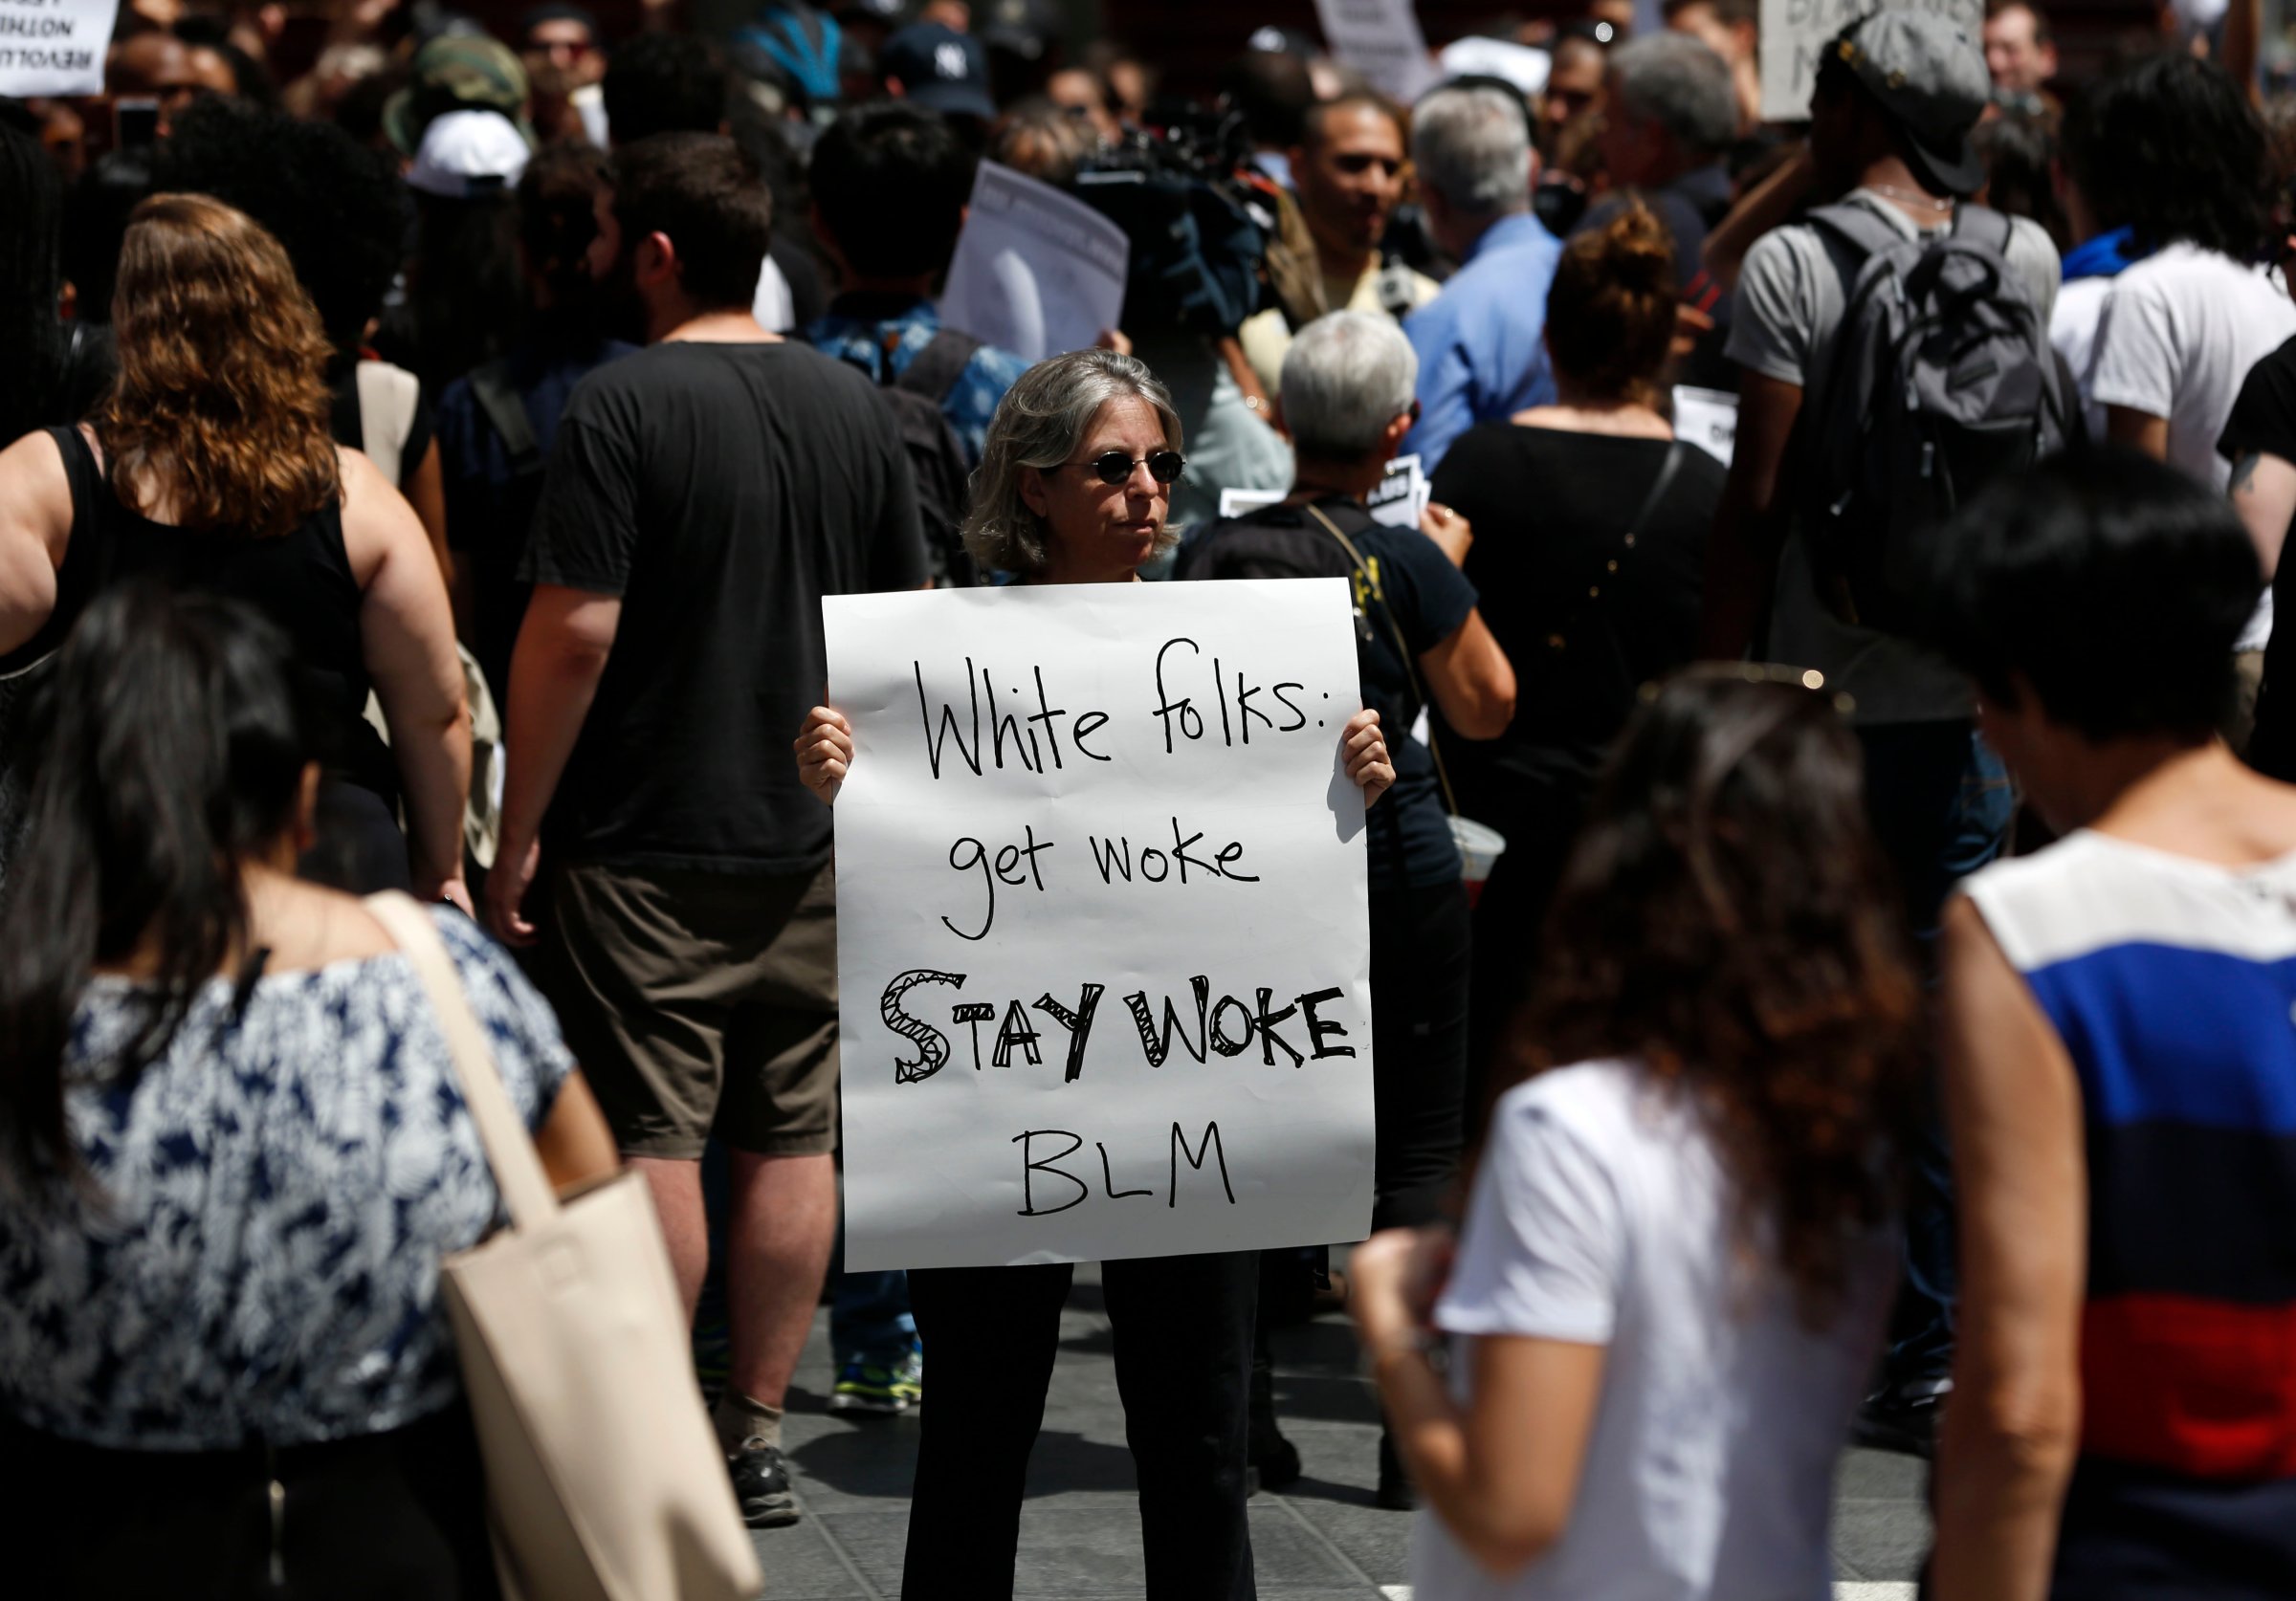 Protesters hold signs during a Black Lives Matter demonstration in New York, July 10, 2016.